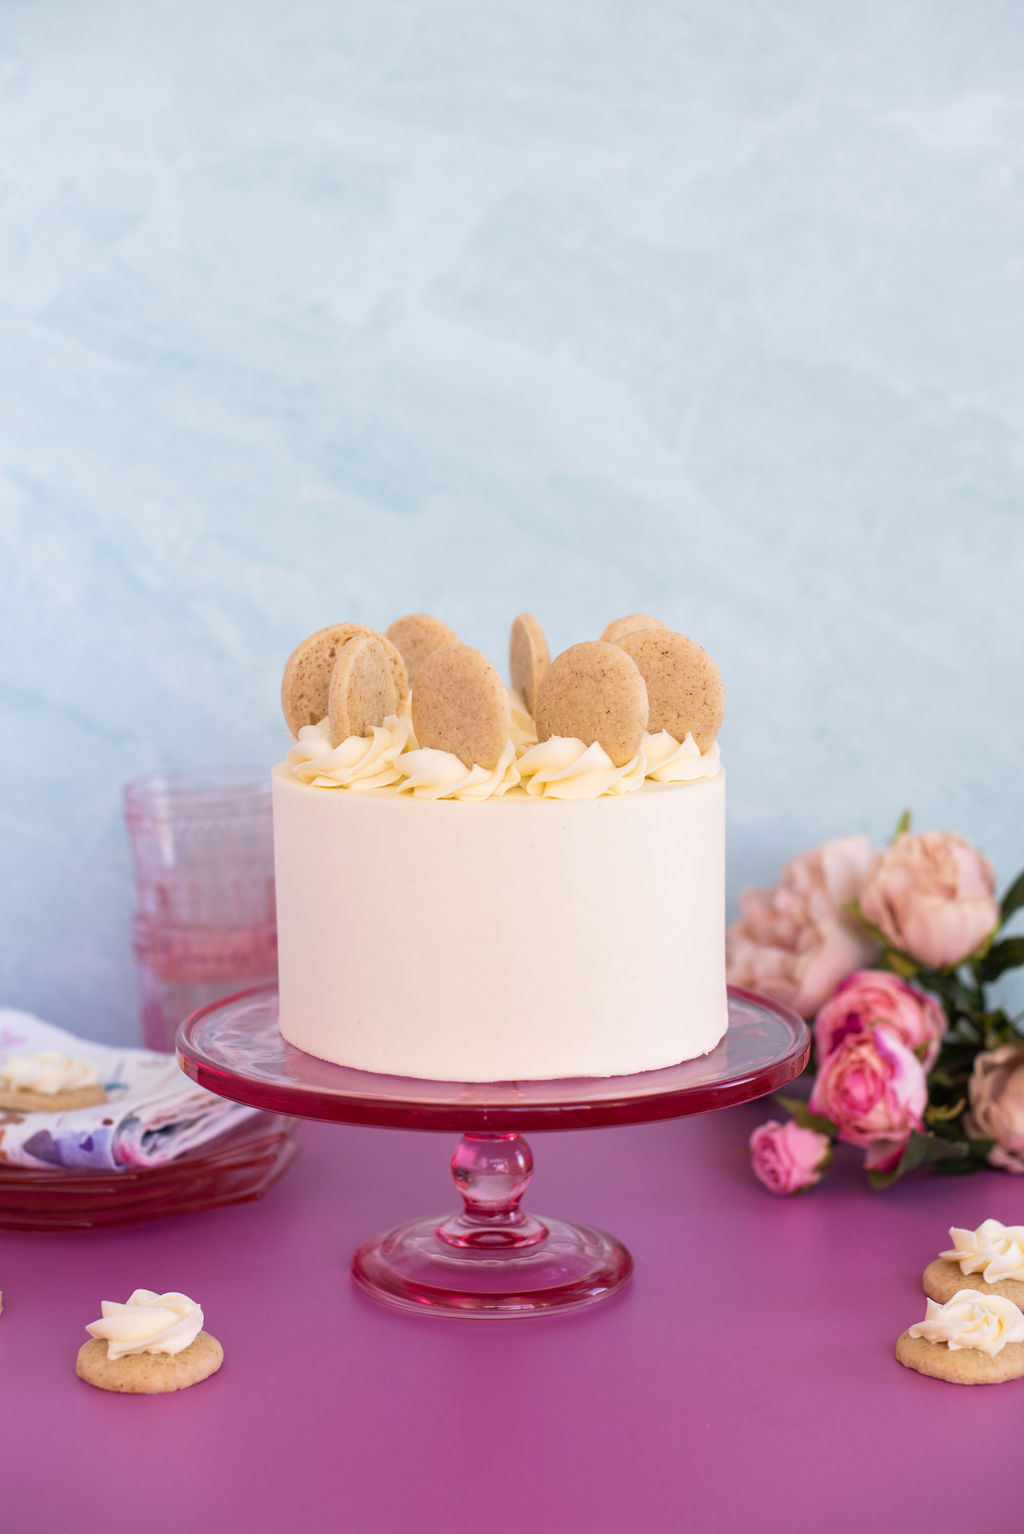 Small two-layer cake on a pink cake stand with cookies on the table.